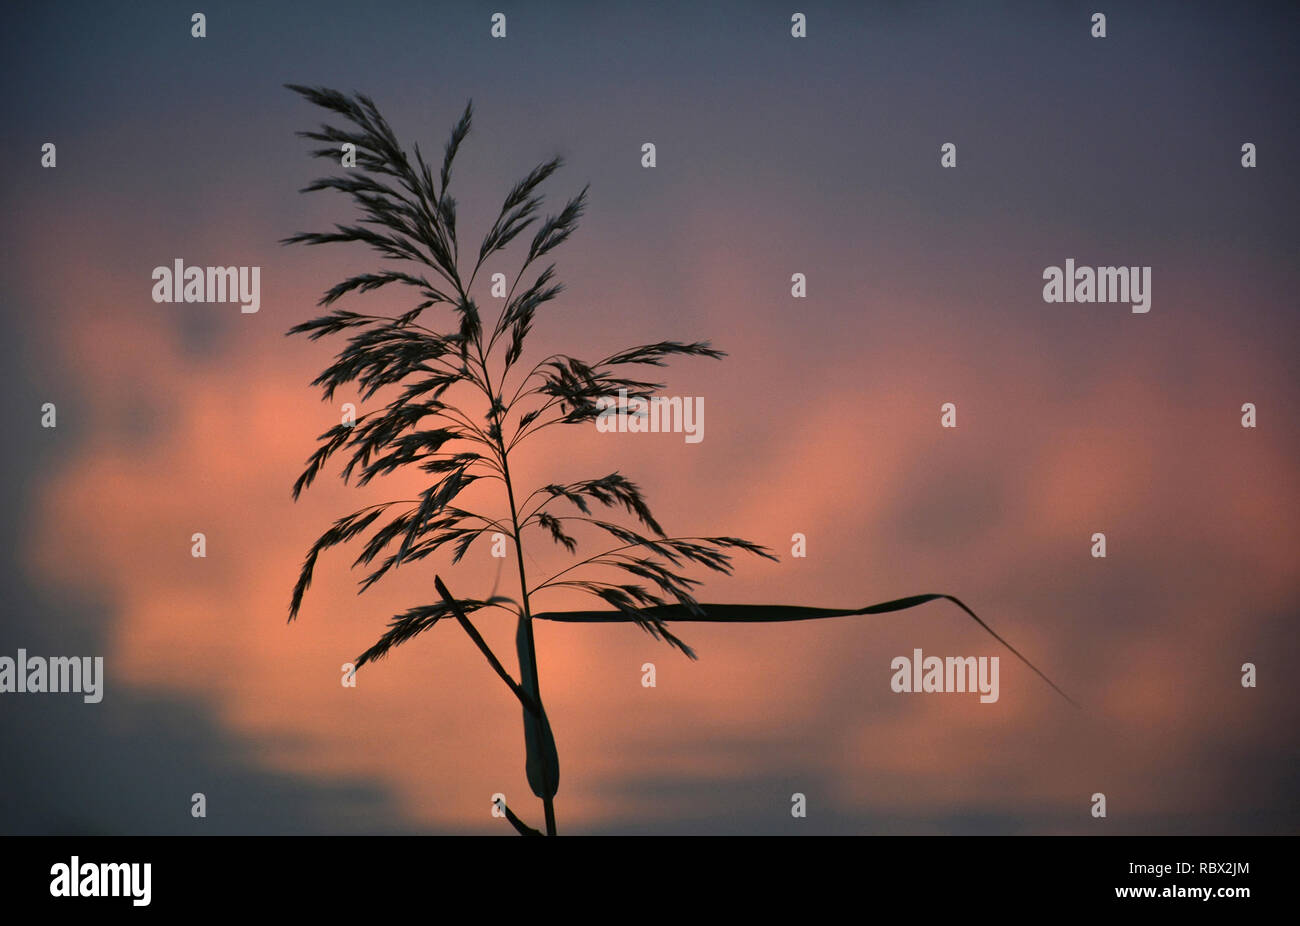 Silhouette of plant on the colorful sky. Silhouette of greenery at sunset. Flower grass silhouette on sky with clouds and sun. Stock Photo